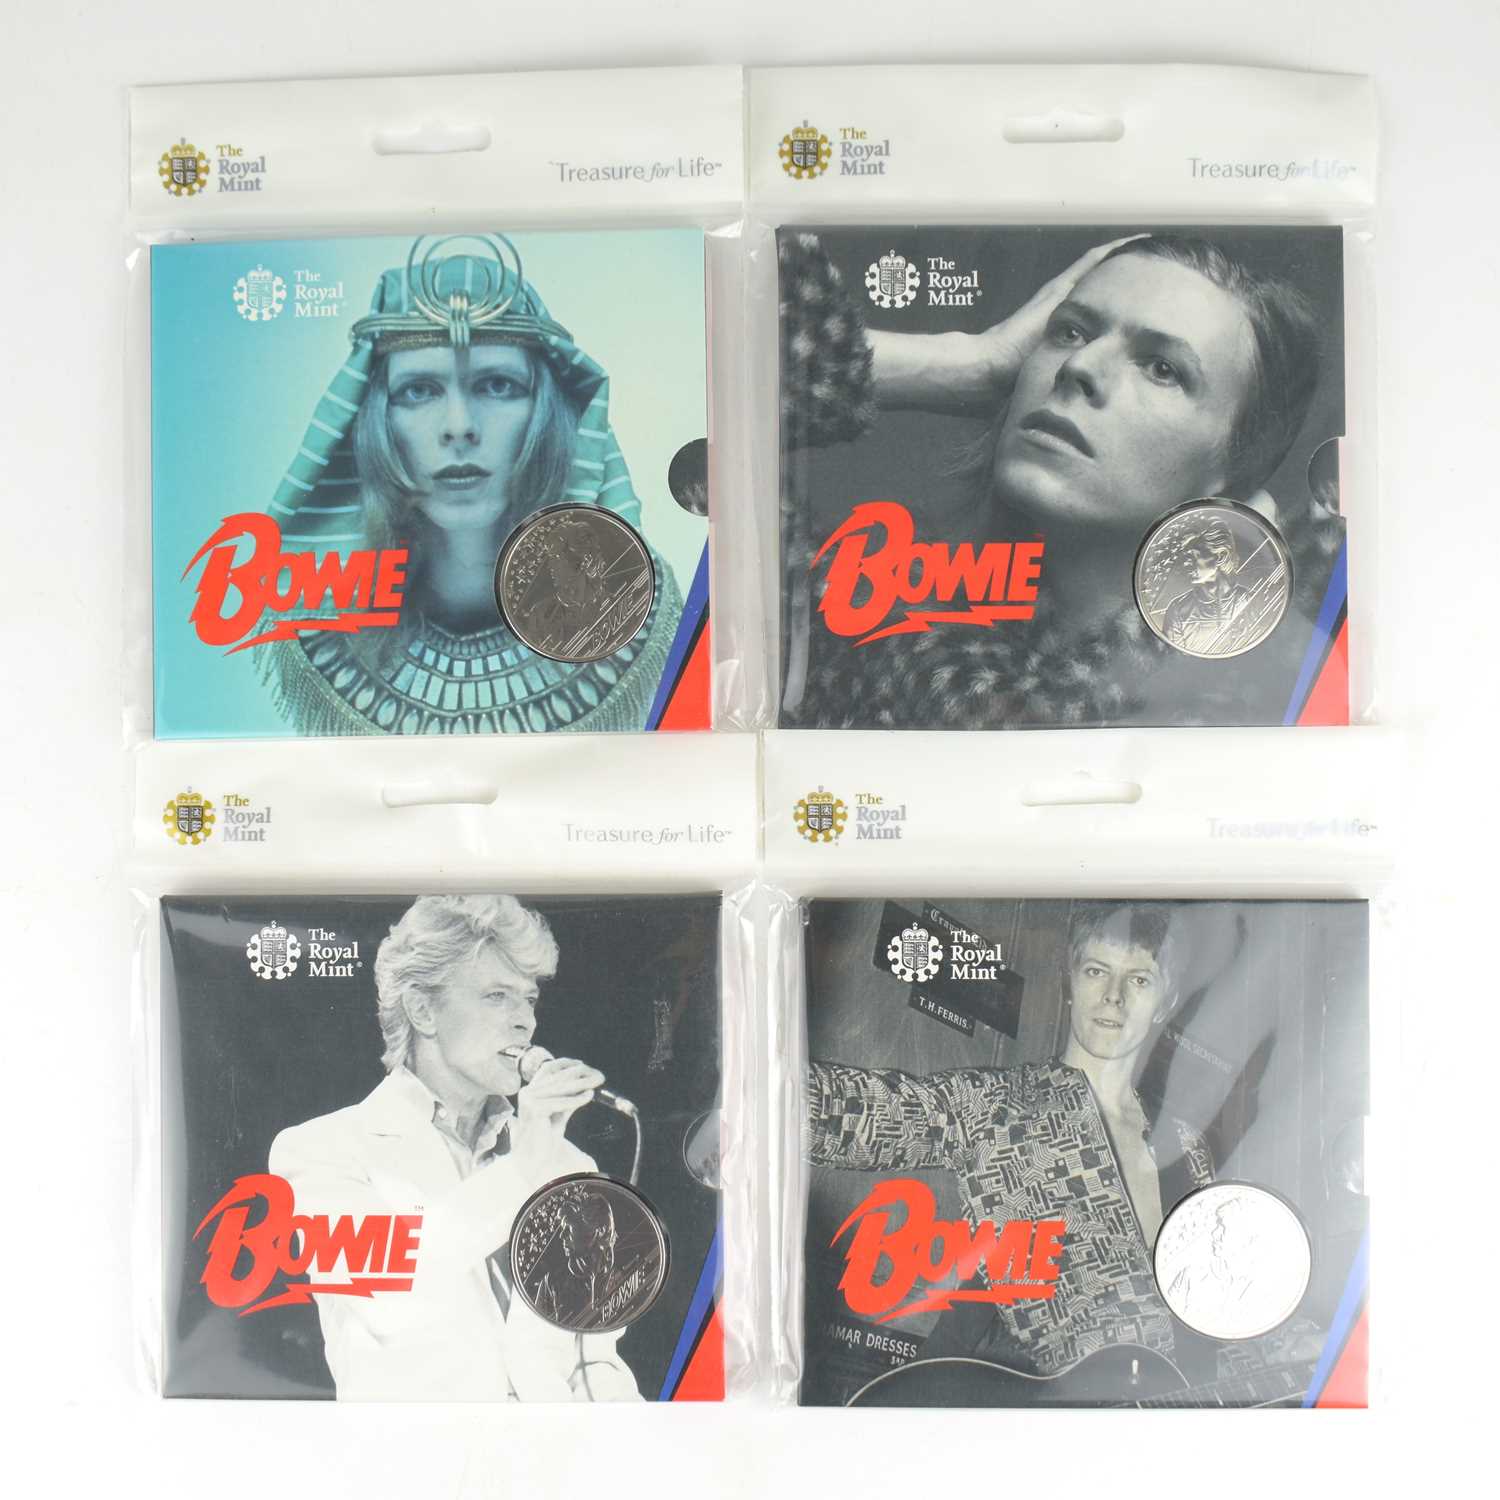 ROYAL MINT; four David Bowie commemorative £5 coin packs from the 'Treasures for Life' series, all